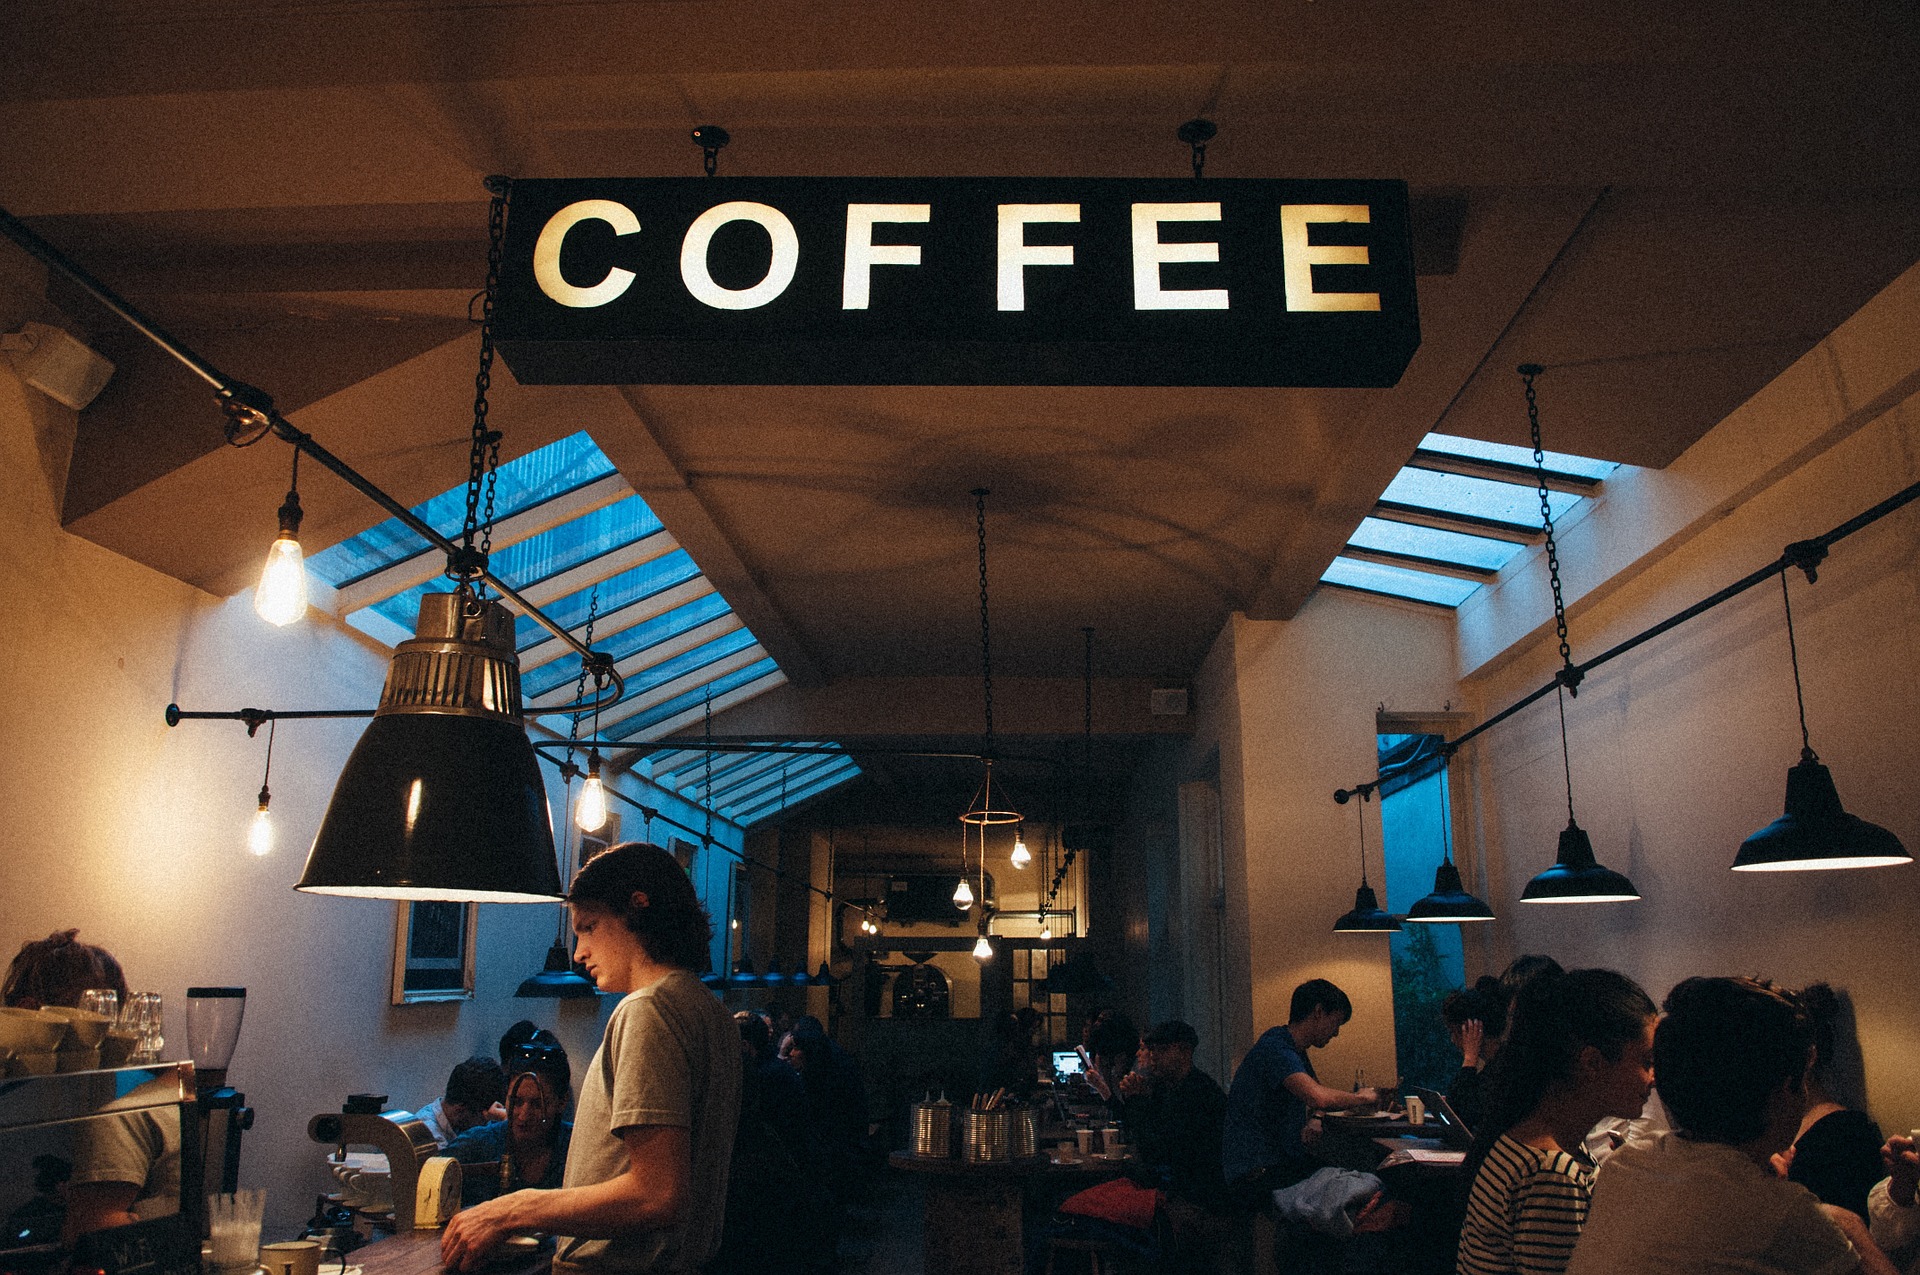 How to find a good coffee shop?